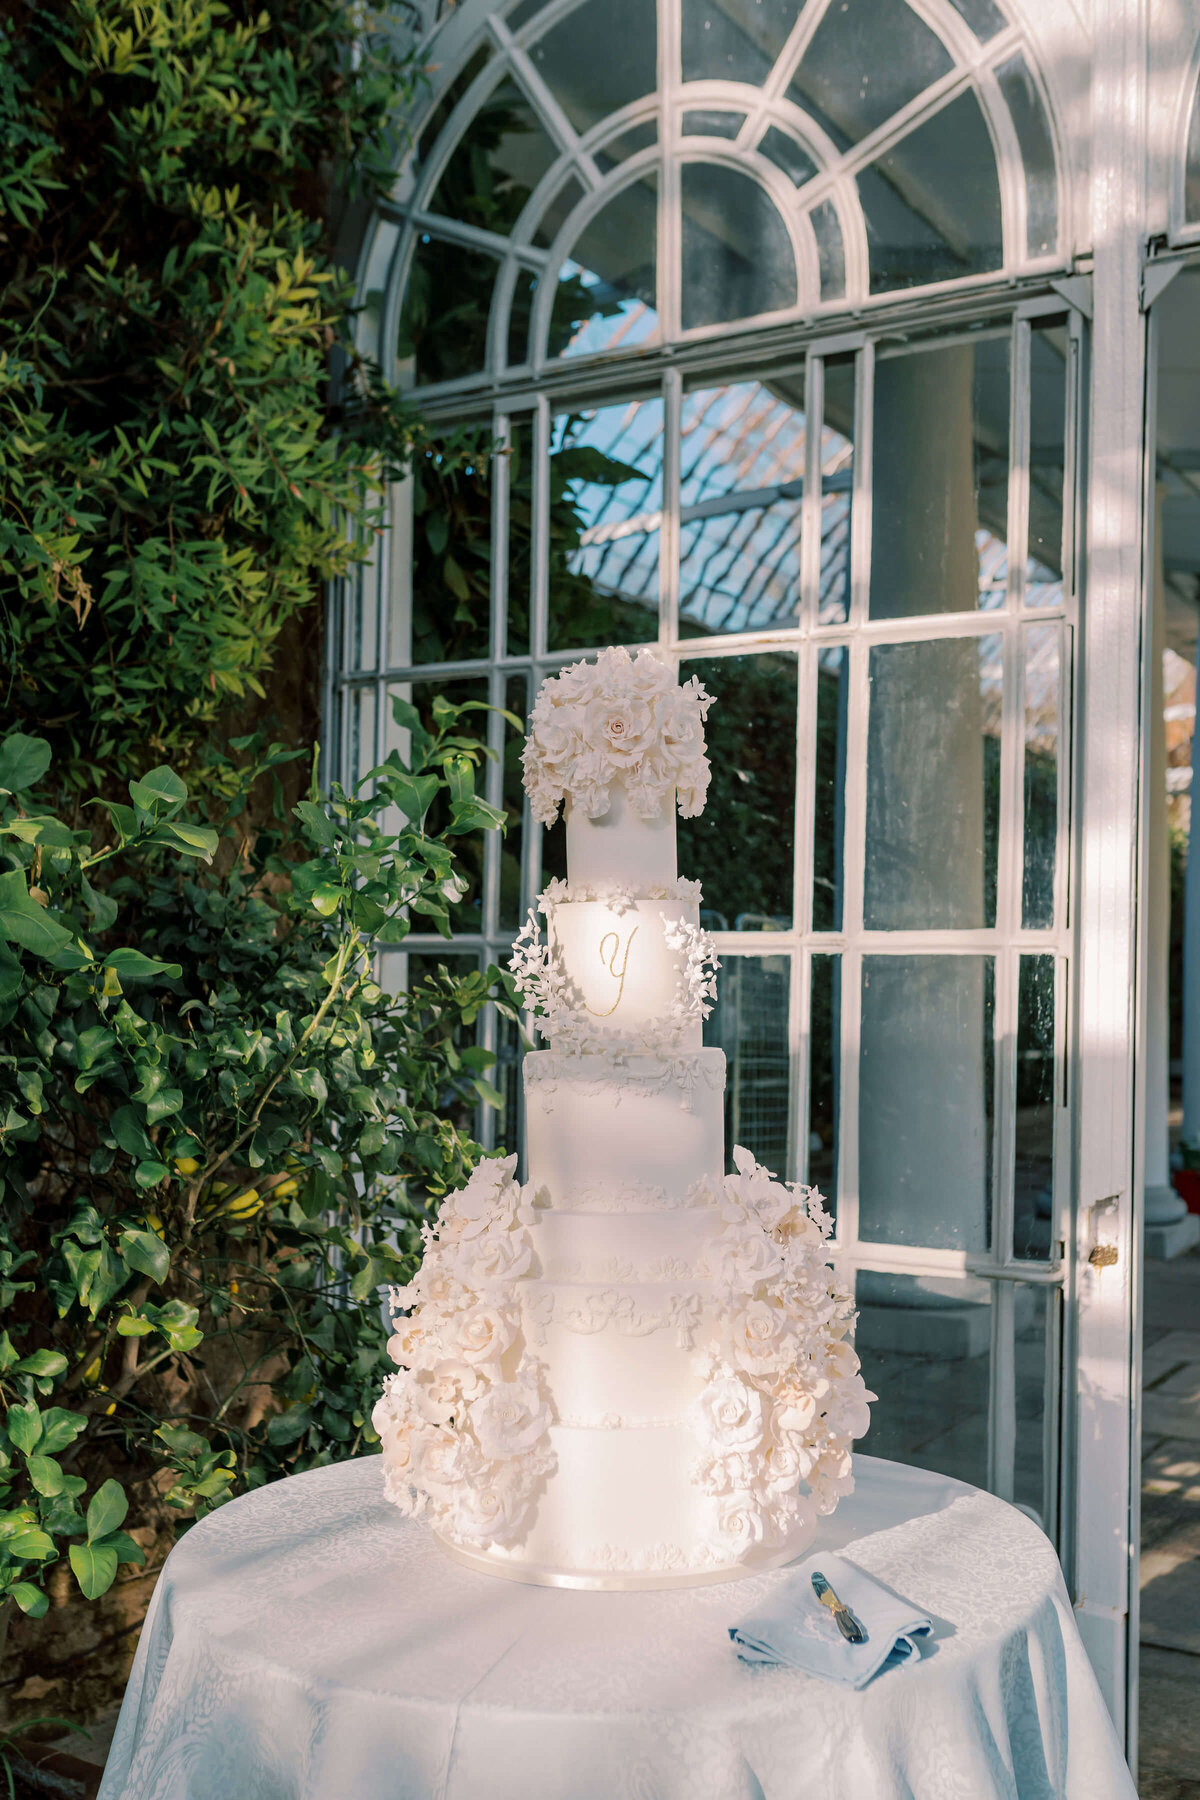 five tier white luxury wedding cake with elaborate white sugar flowers with green foliage in the background in the orangery at avington park